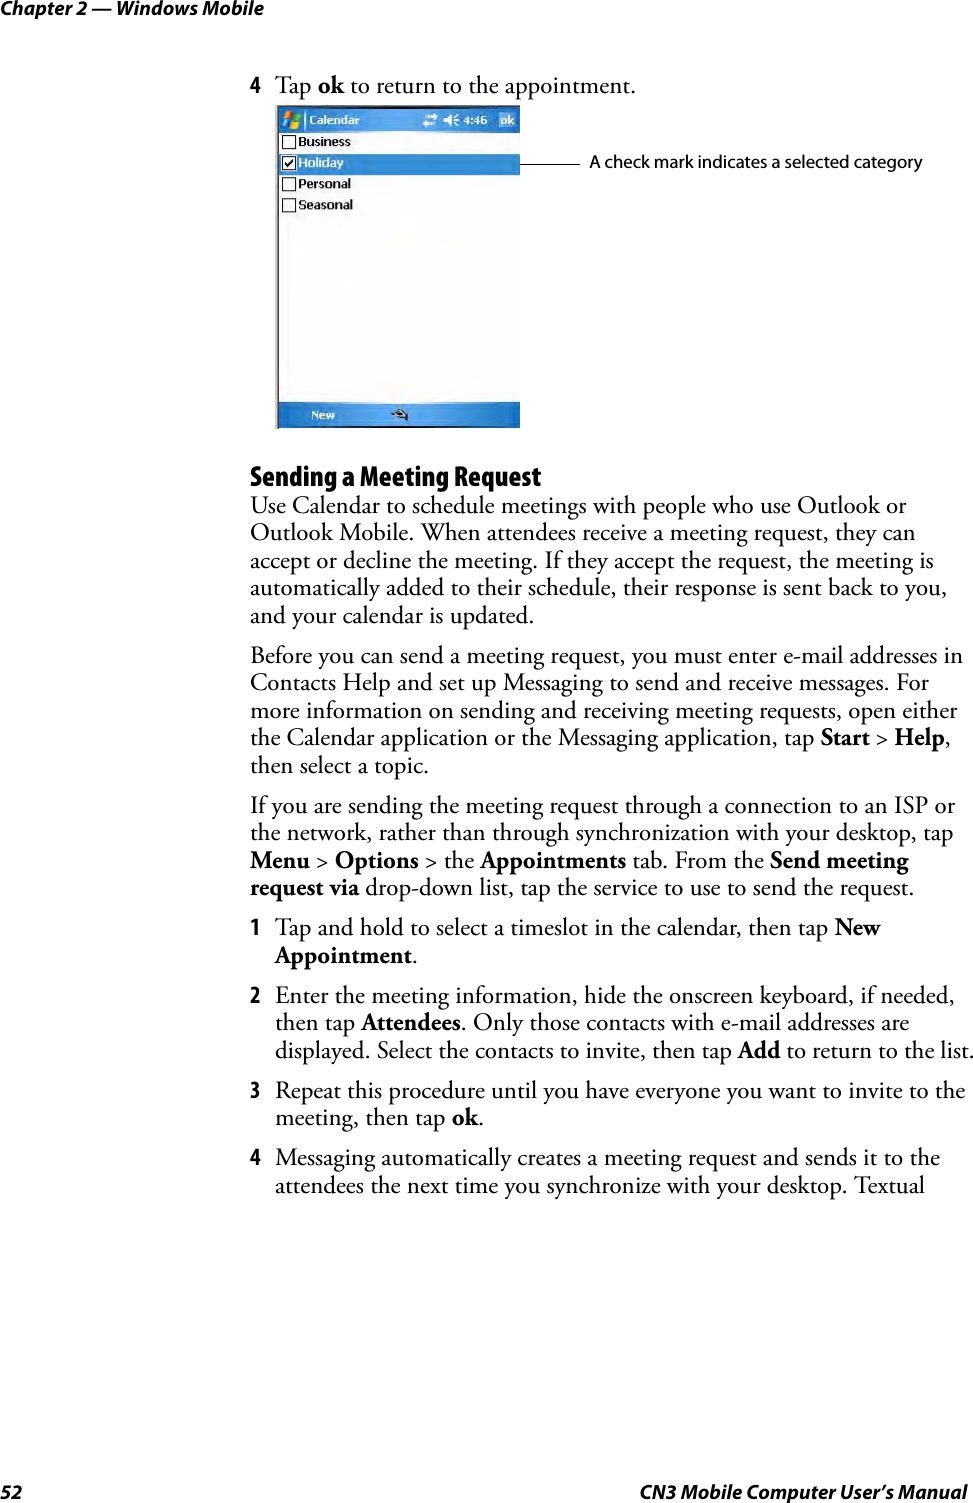 Chapter 2 — Windows Mobile52 CN3 Mobile Computer User’s Manual4Tap  ok to return to the appointment.Sending a Meeting RequestUse Calendar to schedule meetings with people who use Outlook or Outlook Mobile. When attendees receive a meeting request, they can accept or decline the meeting. If they accept the request, the meeting is automatically added to their schedule, their response is sent back to you, and your calendar is updated.Before you can send a meeting request, you must enter e-mail addresses in Contacts Help and set up Messaging to send and receive messages. For more information on sending and receiving meeting requests, open either the Calendar application or the Messaging application, tap Start &gt; Help, then select a topic.If you are sending the meeting request through a connection to an ISP or the network, rather than through synchronization with your desktop, tap Menu &gt; Options &gt; the Appointments tab. From the Send meeting request via drop-down list, tap the service to use to send the request.1Tap and hold to select a timeslot in the calendar, then tap New Appointment.2Enter the meeting information, hide the onscreen keyboard, if needed, then tap Attendees. Only those contacts with e-mail addresses are displayed. Select the contacts to invite, then tap Add to return to the list.3Repeat this procedure until you have everyone you want to invite to the meeting, then tap ok.4Messaging automatically creates a meeting request and sends it to the attendees the next time you synchronize with your desktop. Textual A check mark indicates a selected category